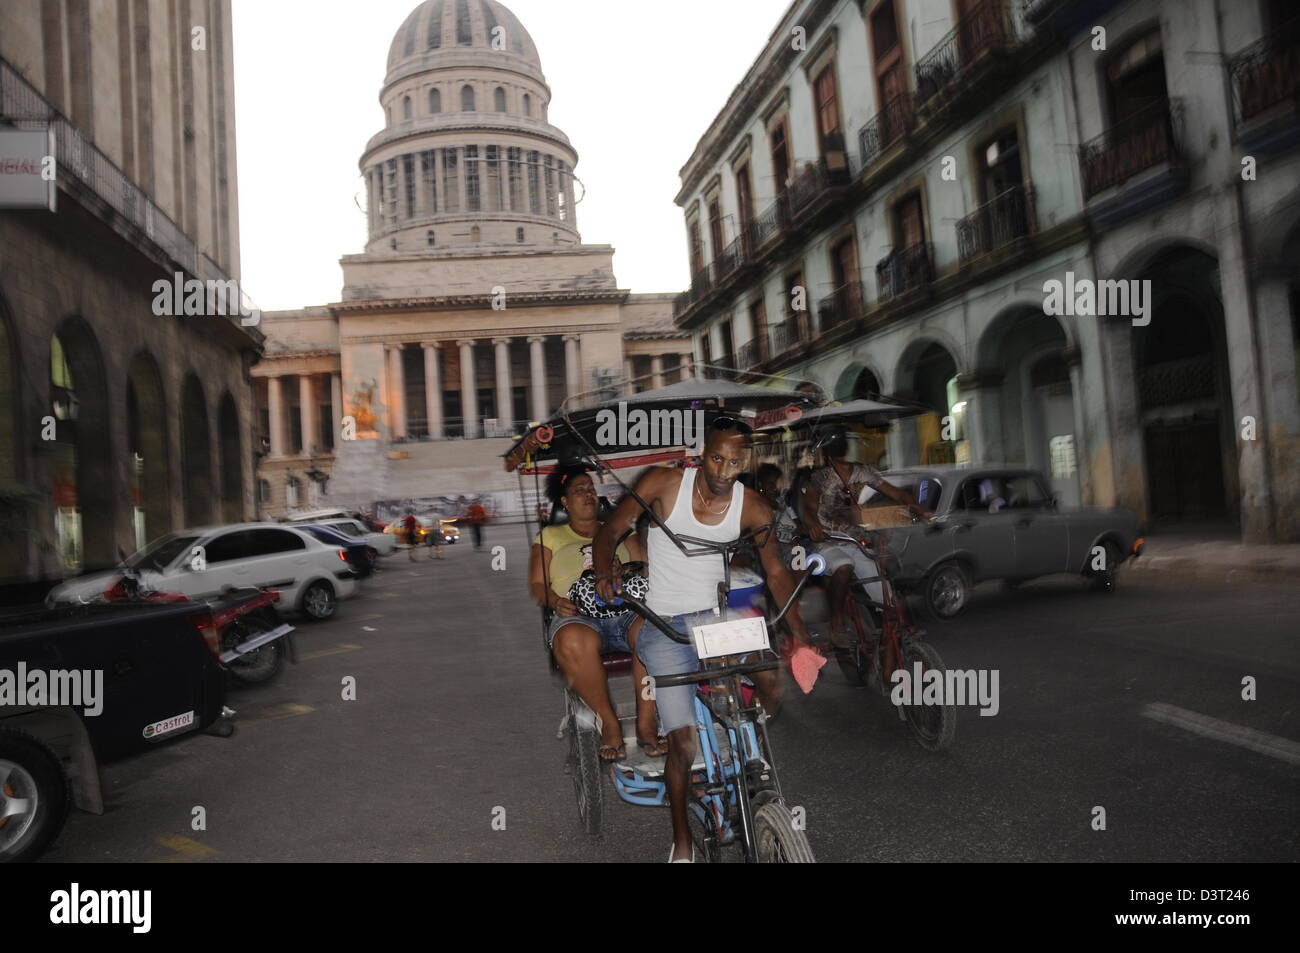 Moving 'Bici' bicycle, calle Brazil with Capitolio in background, Old town Havana Stock Photo